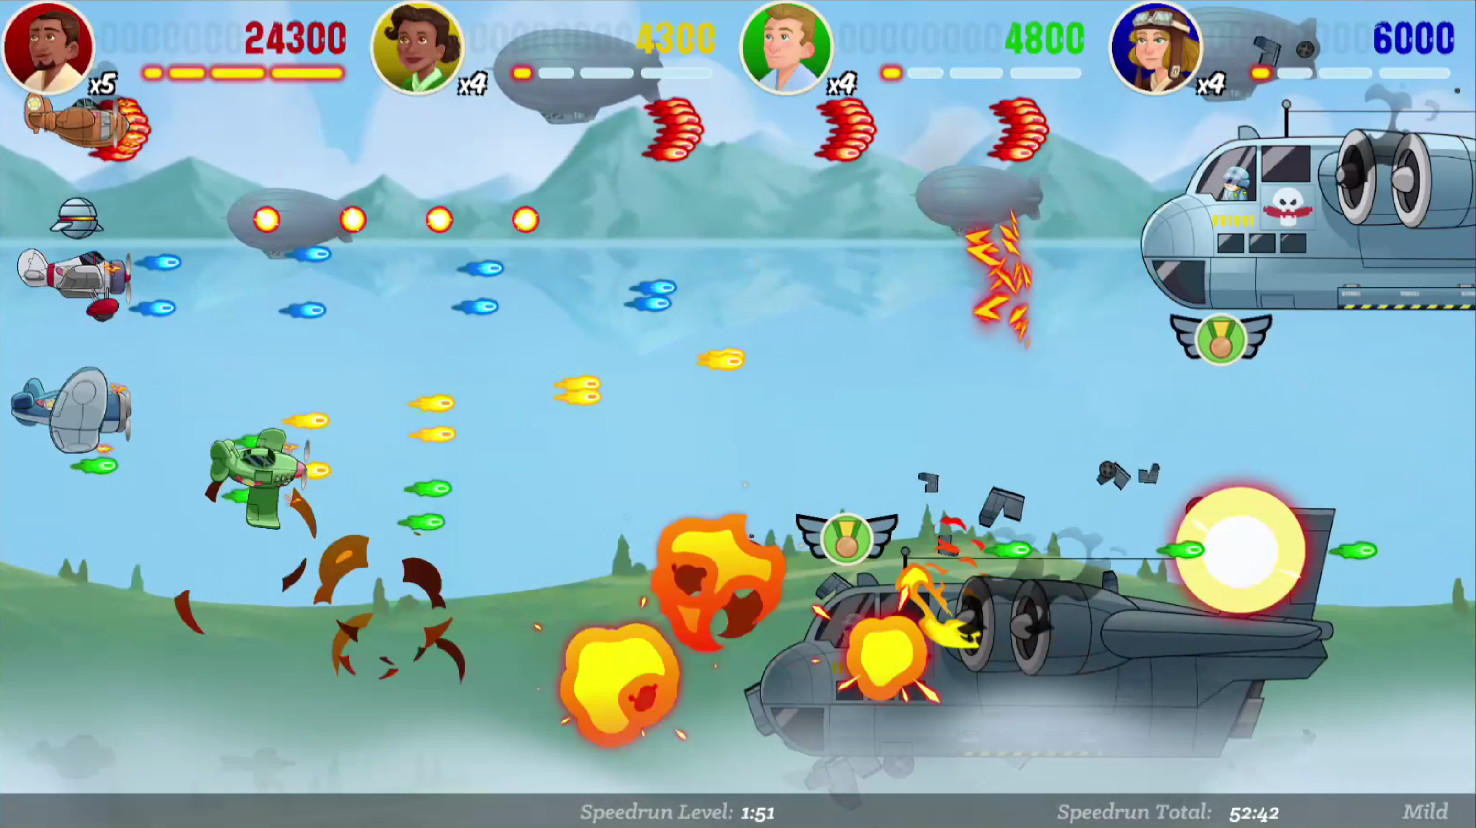 Dogfight: A Sausage Bomber Story Steam CD Key 2.23 $